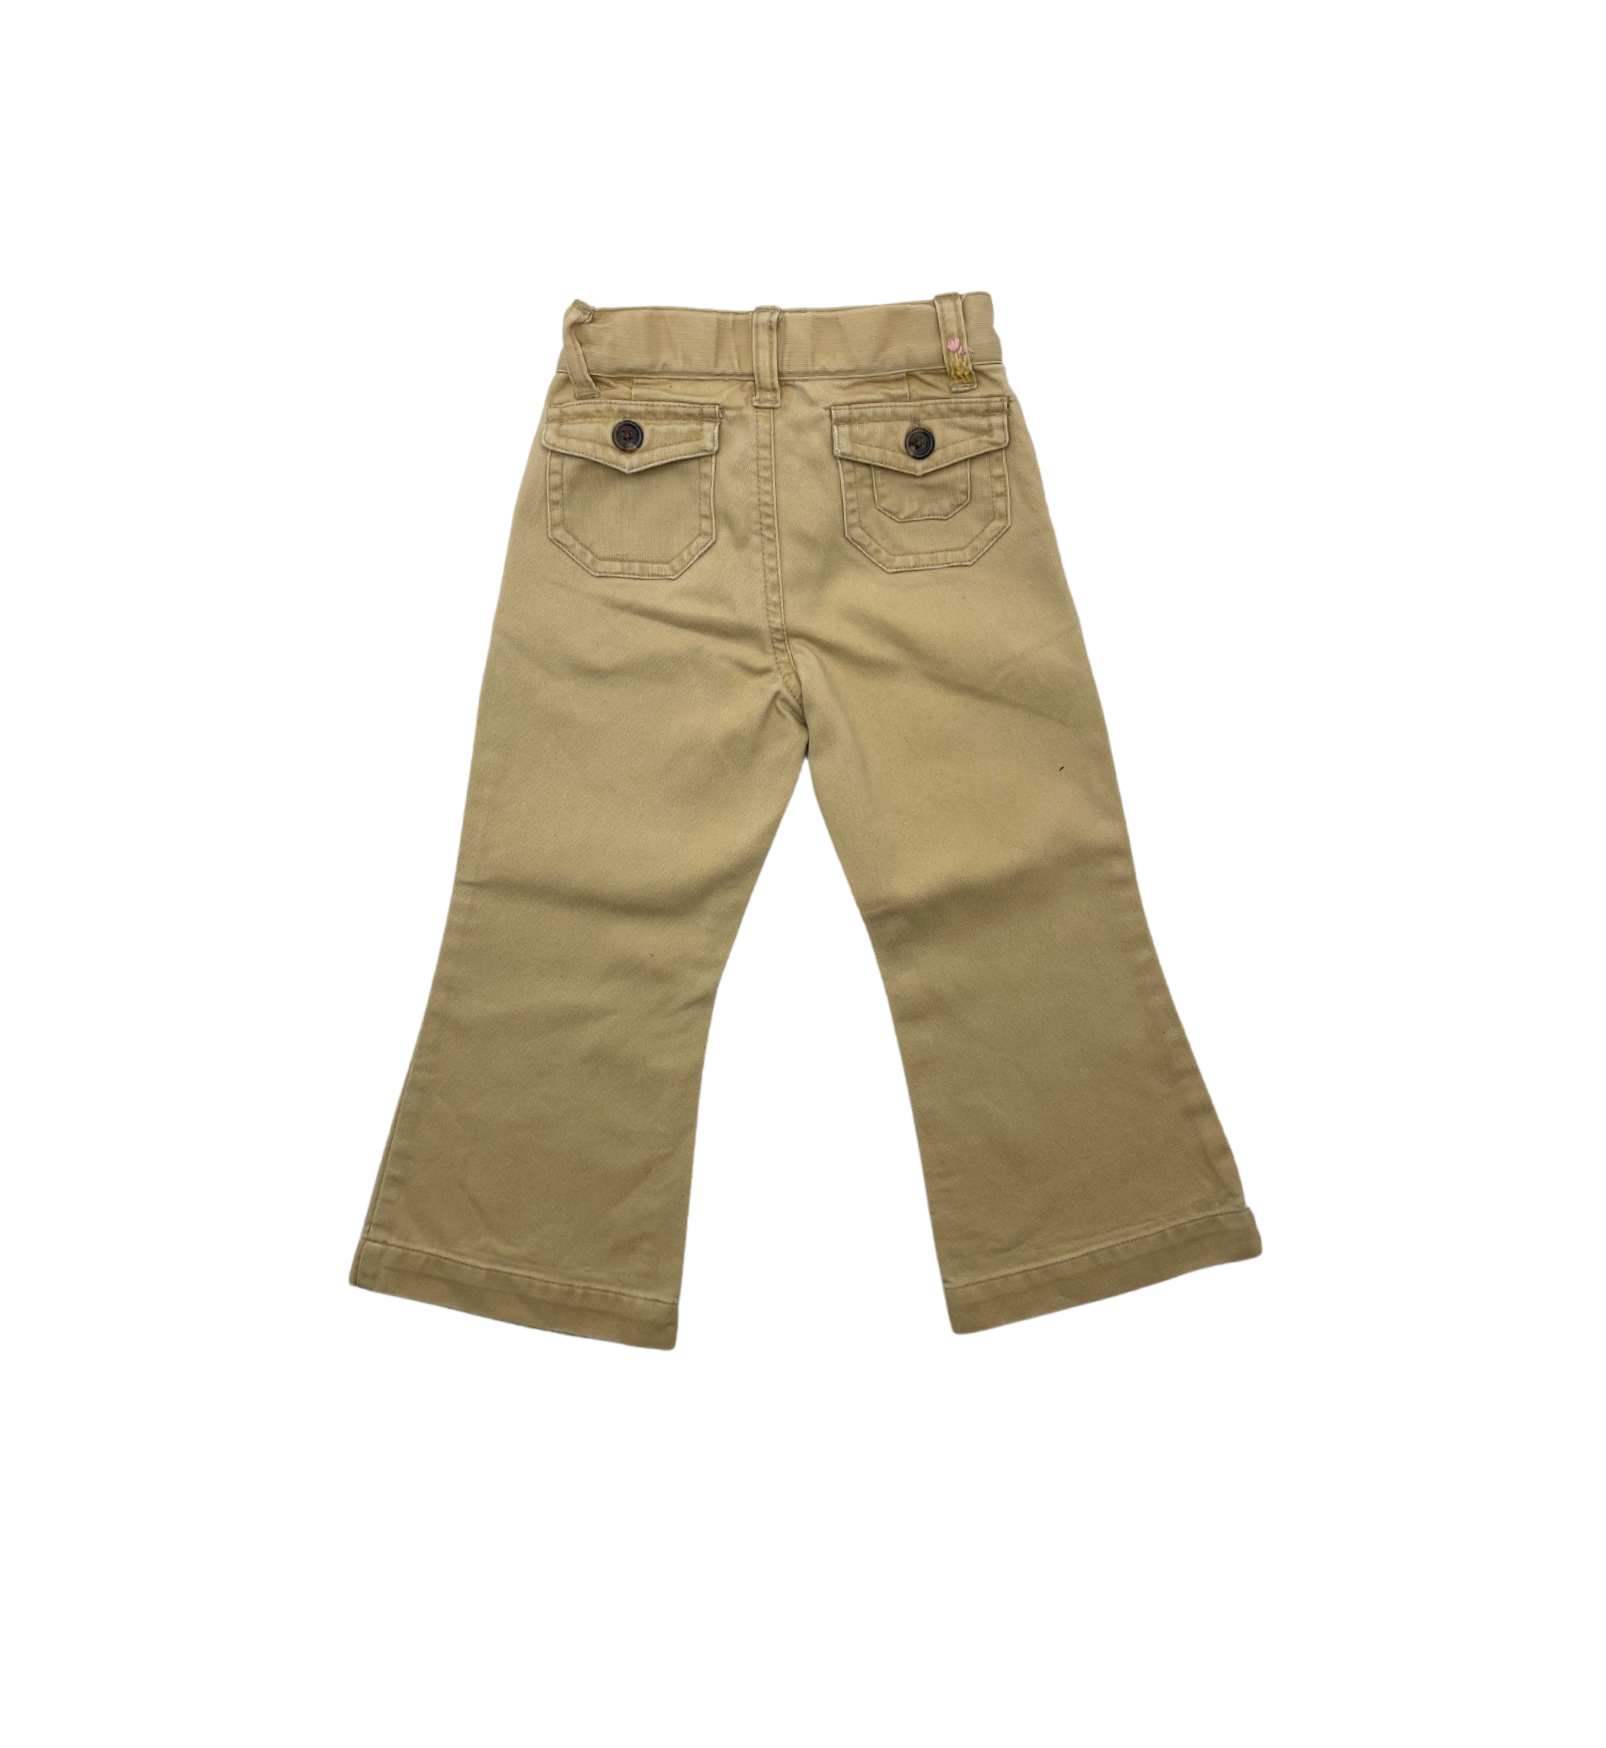 RALPH LAUREN - Beige pants with flower embroidery - 2 years old